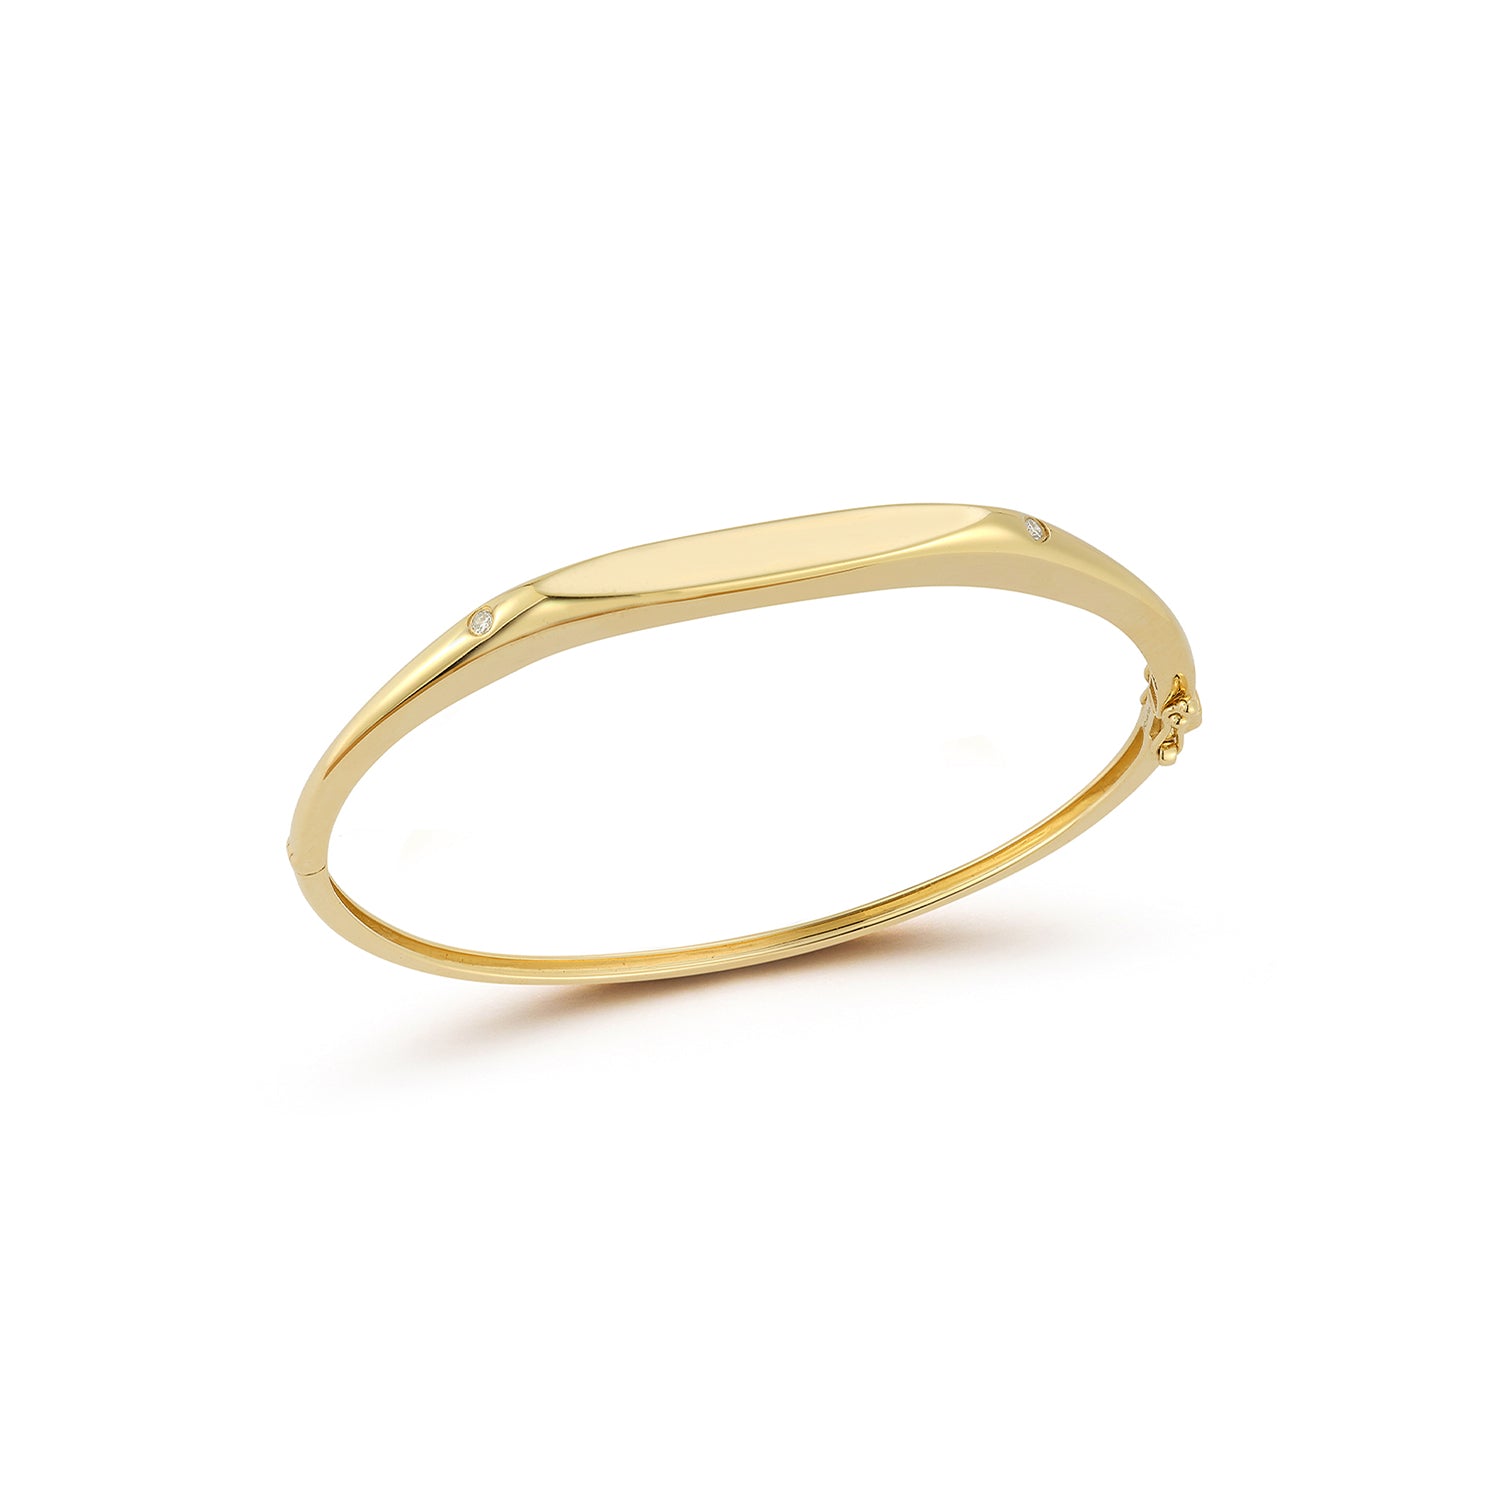 Gold Bangle with Diamond Detail in 14k yellow gold